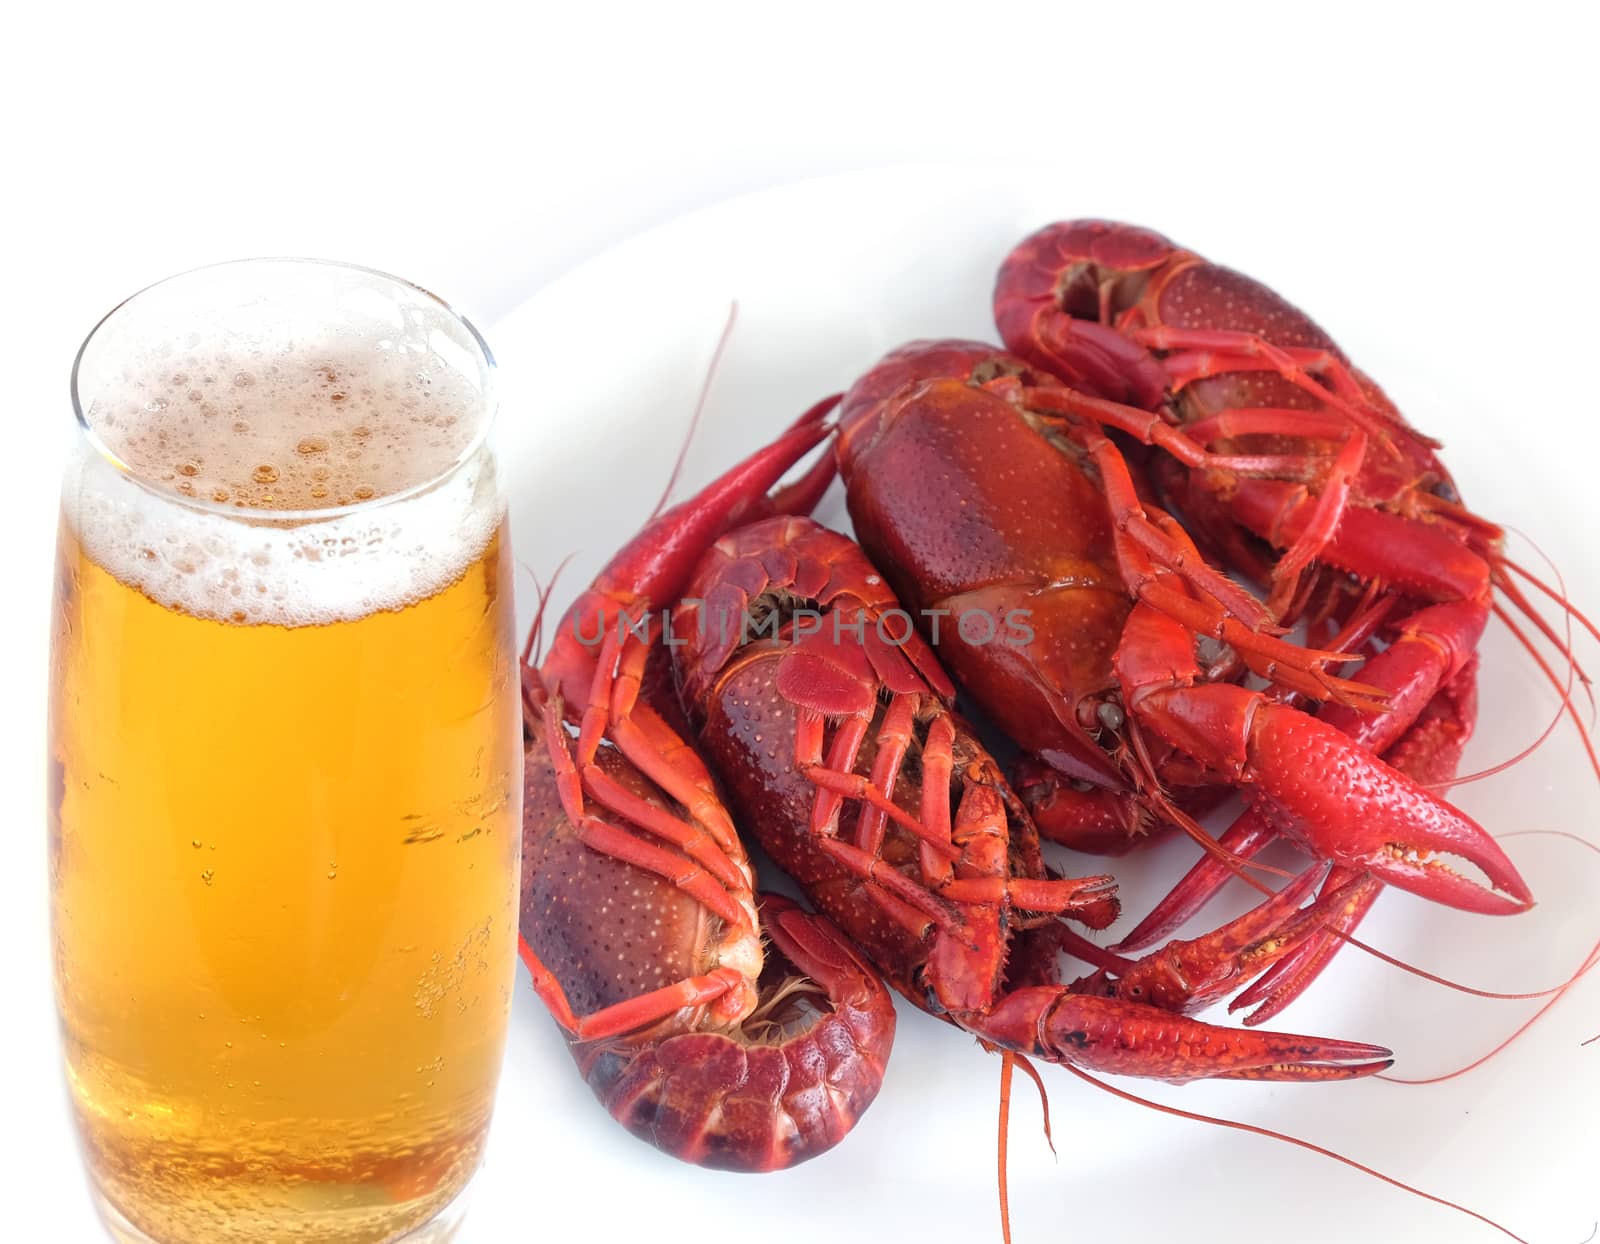 Four boiled crayfish color red and high glass of amber beer studio shot isolated on white background top view closeup by dymaxfoto